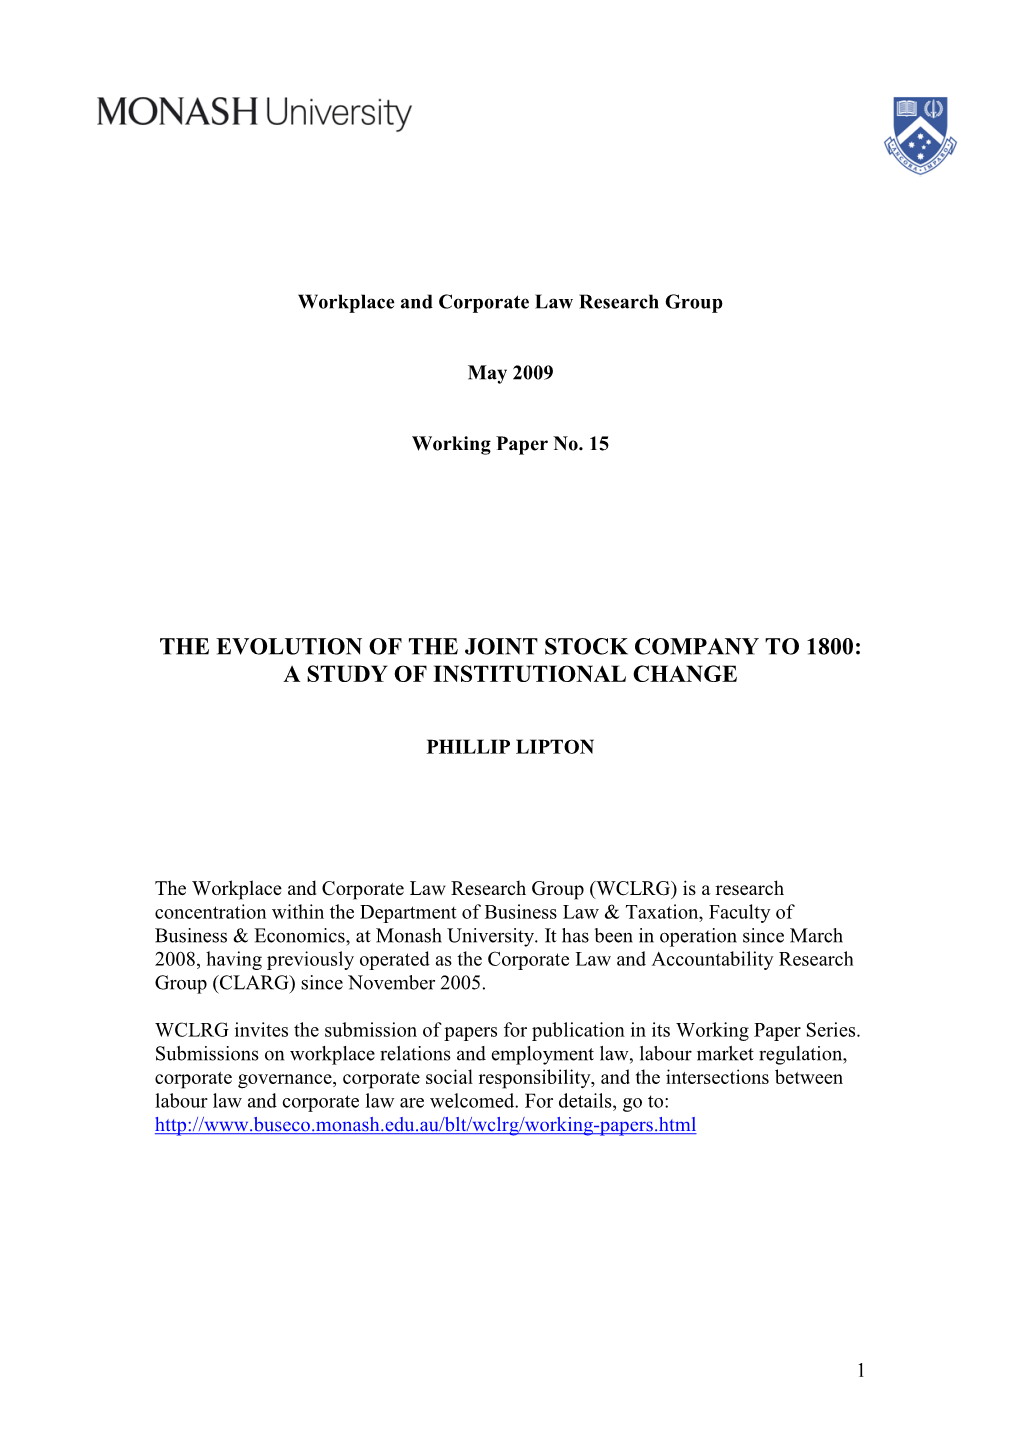 The Evolution of the Joint Stock Company to 1800: a Study of Institutional Change